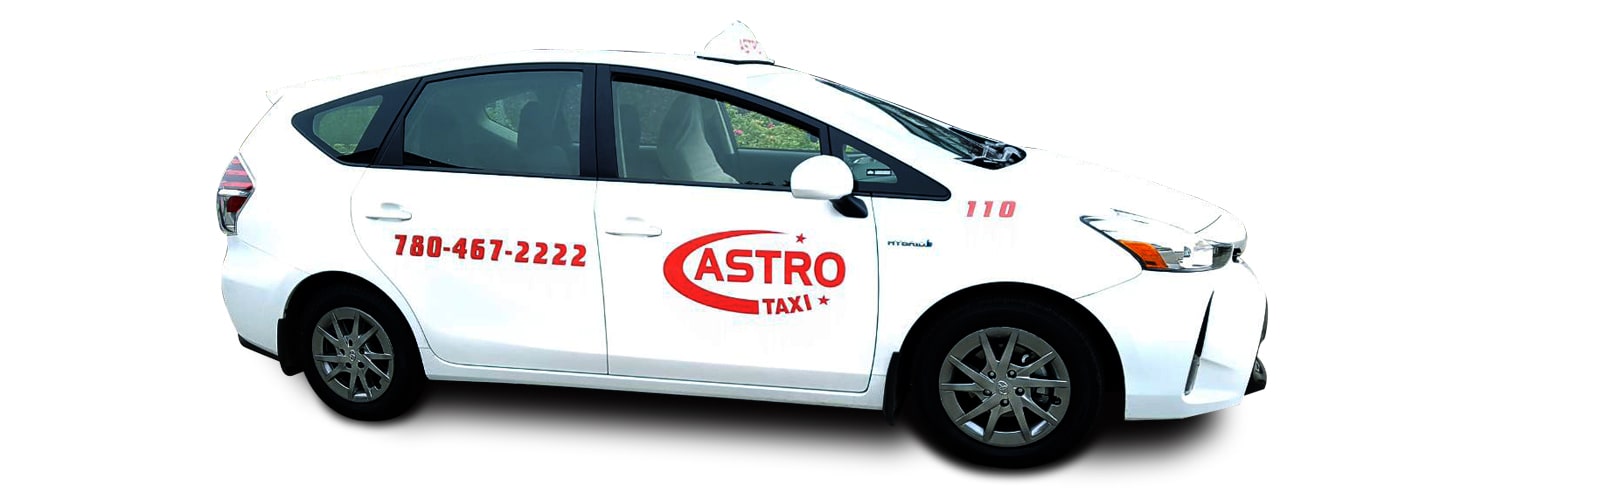 Book Airport Taxi Sherwood Park Cabs | Astro Taxi